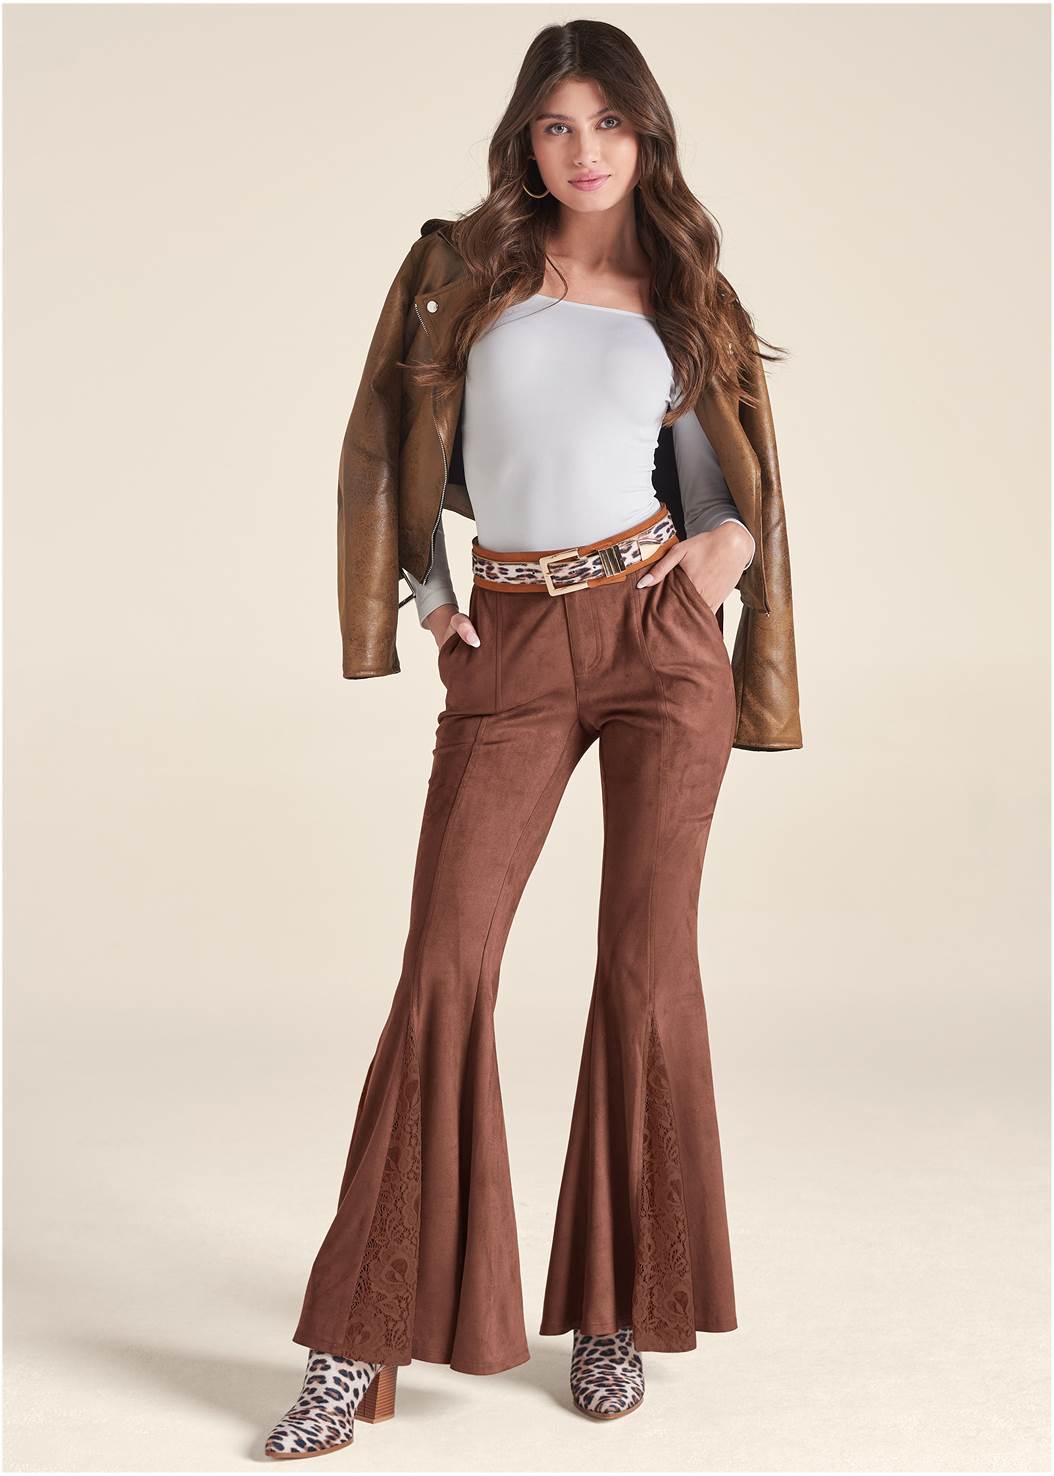 Women Solid Color Flared Suede Brown Pants, High Waist Bootcut Trousers -  WAY